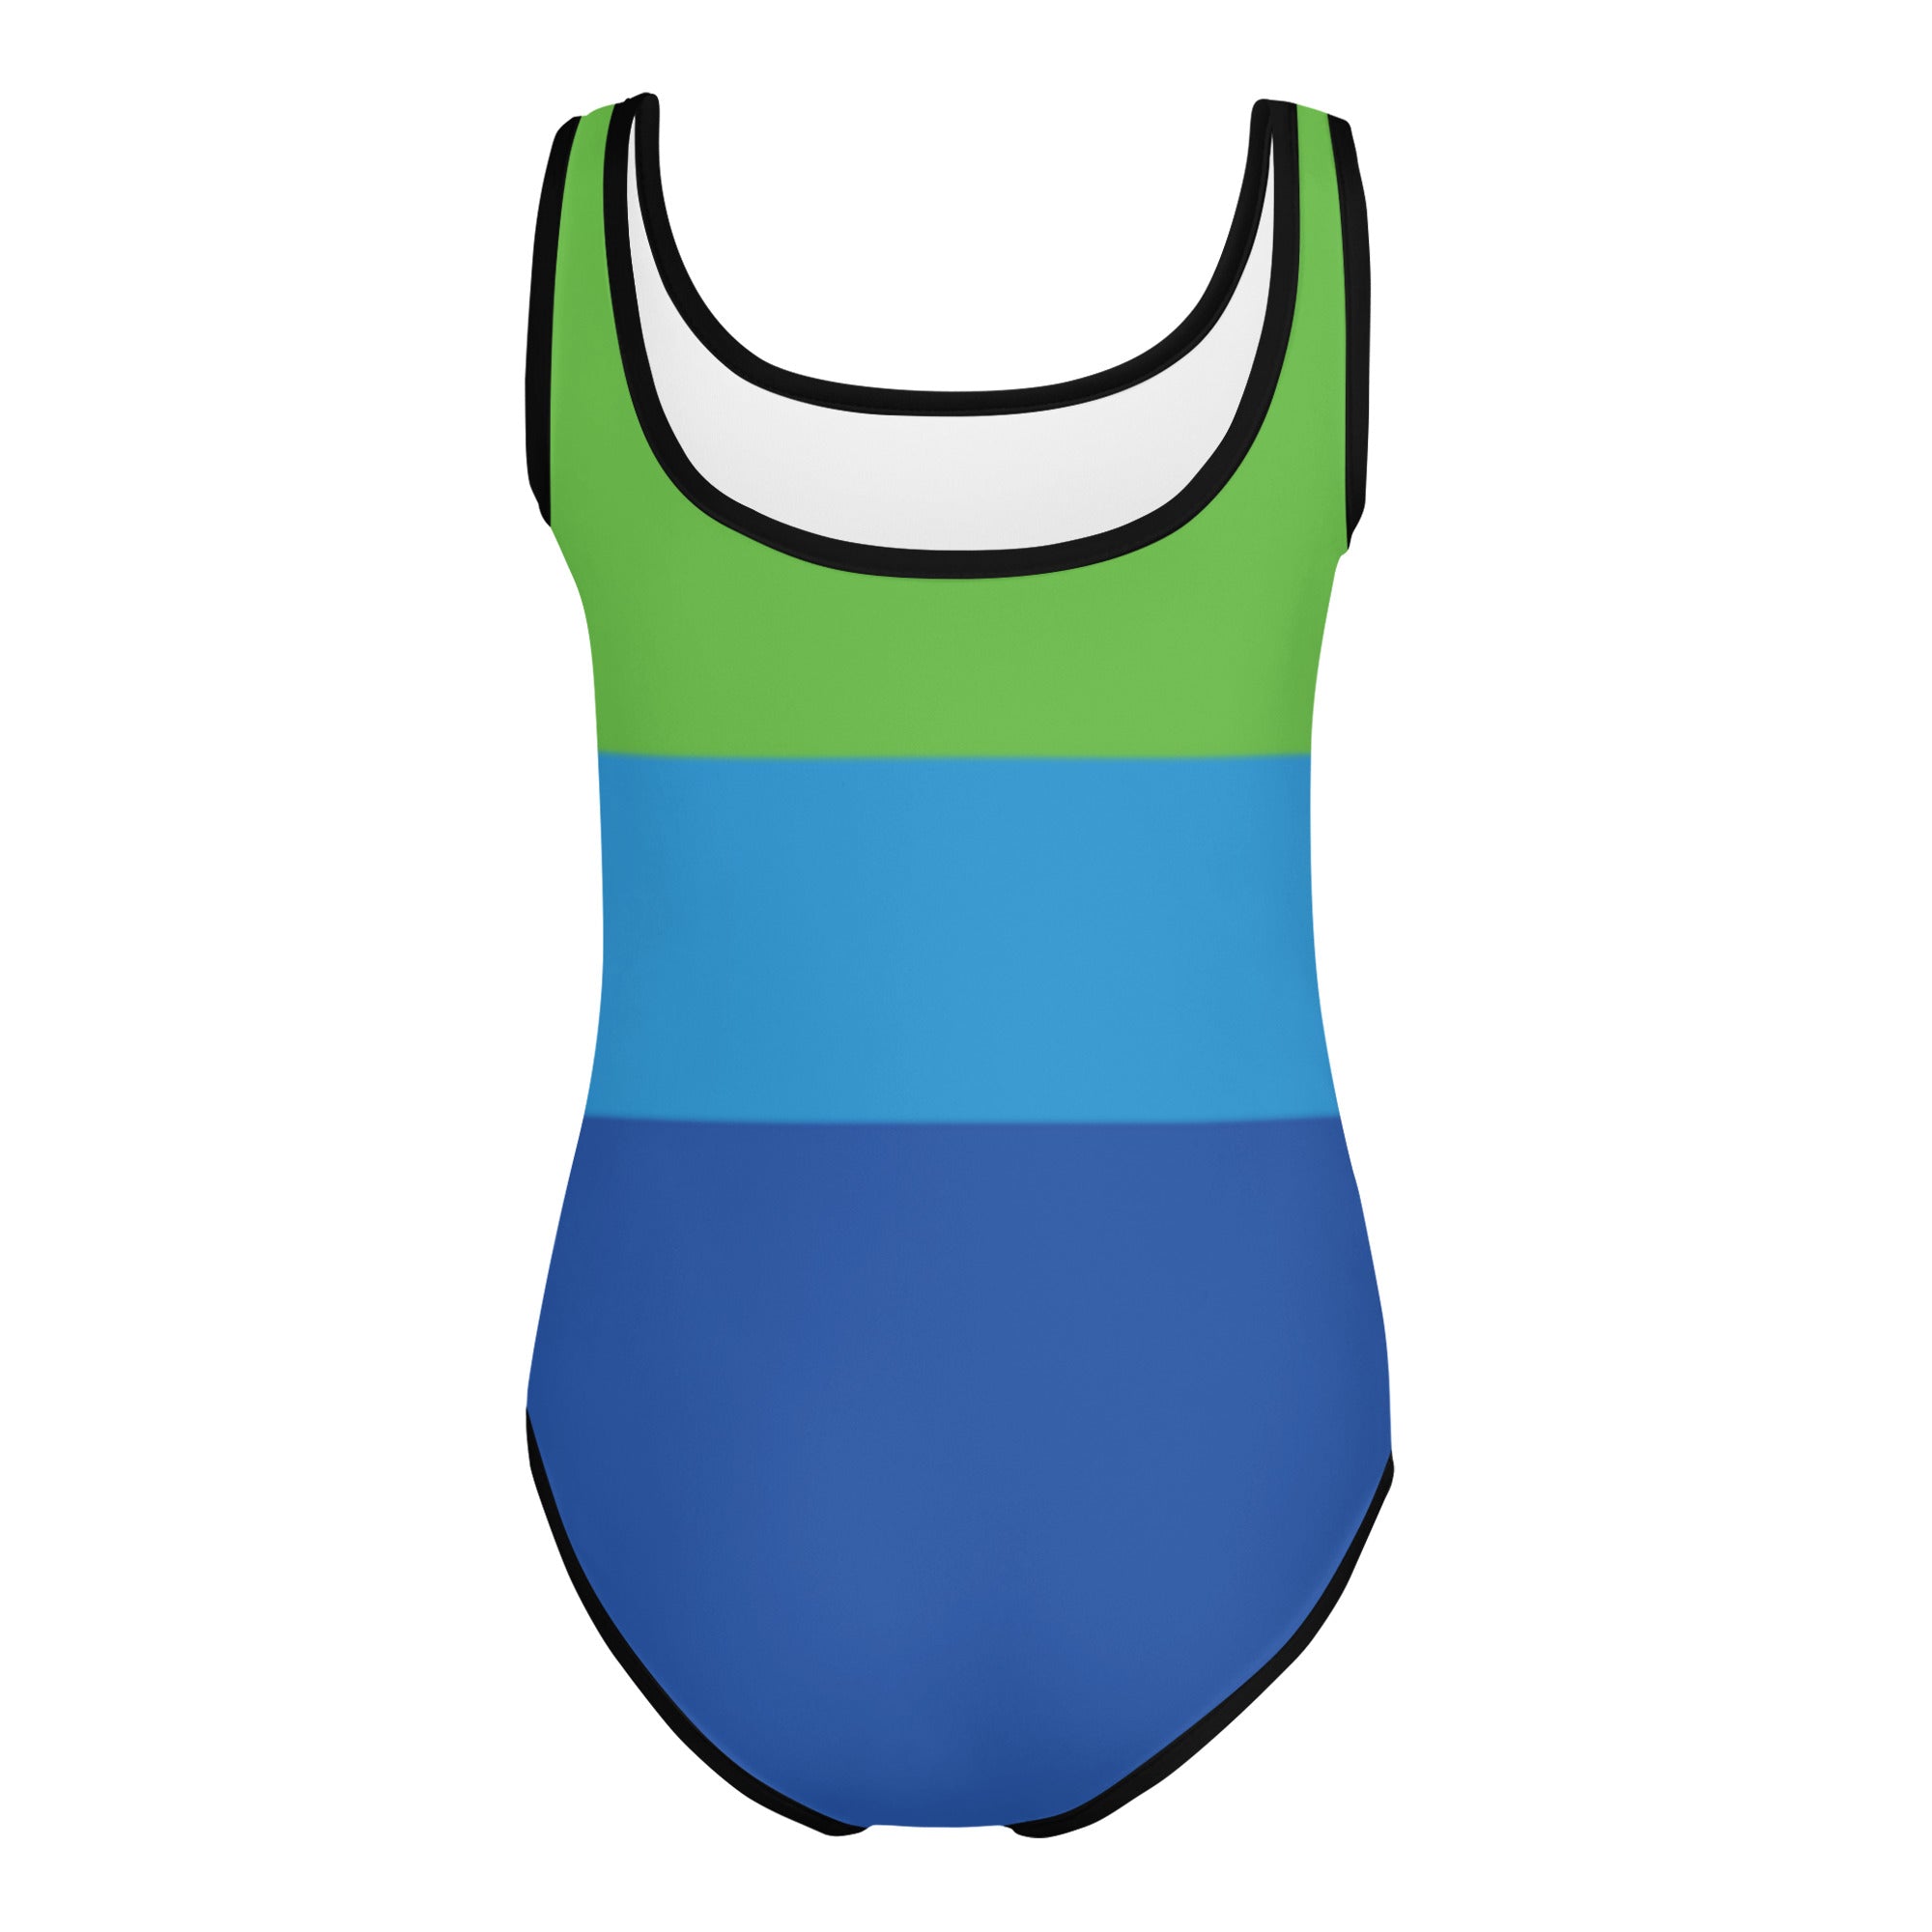 Small Campers Tri-Color Llanada Swimsuit